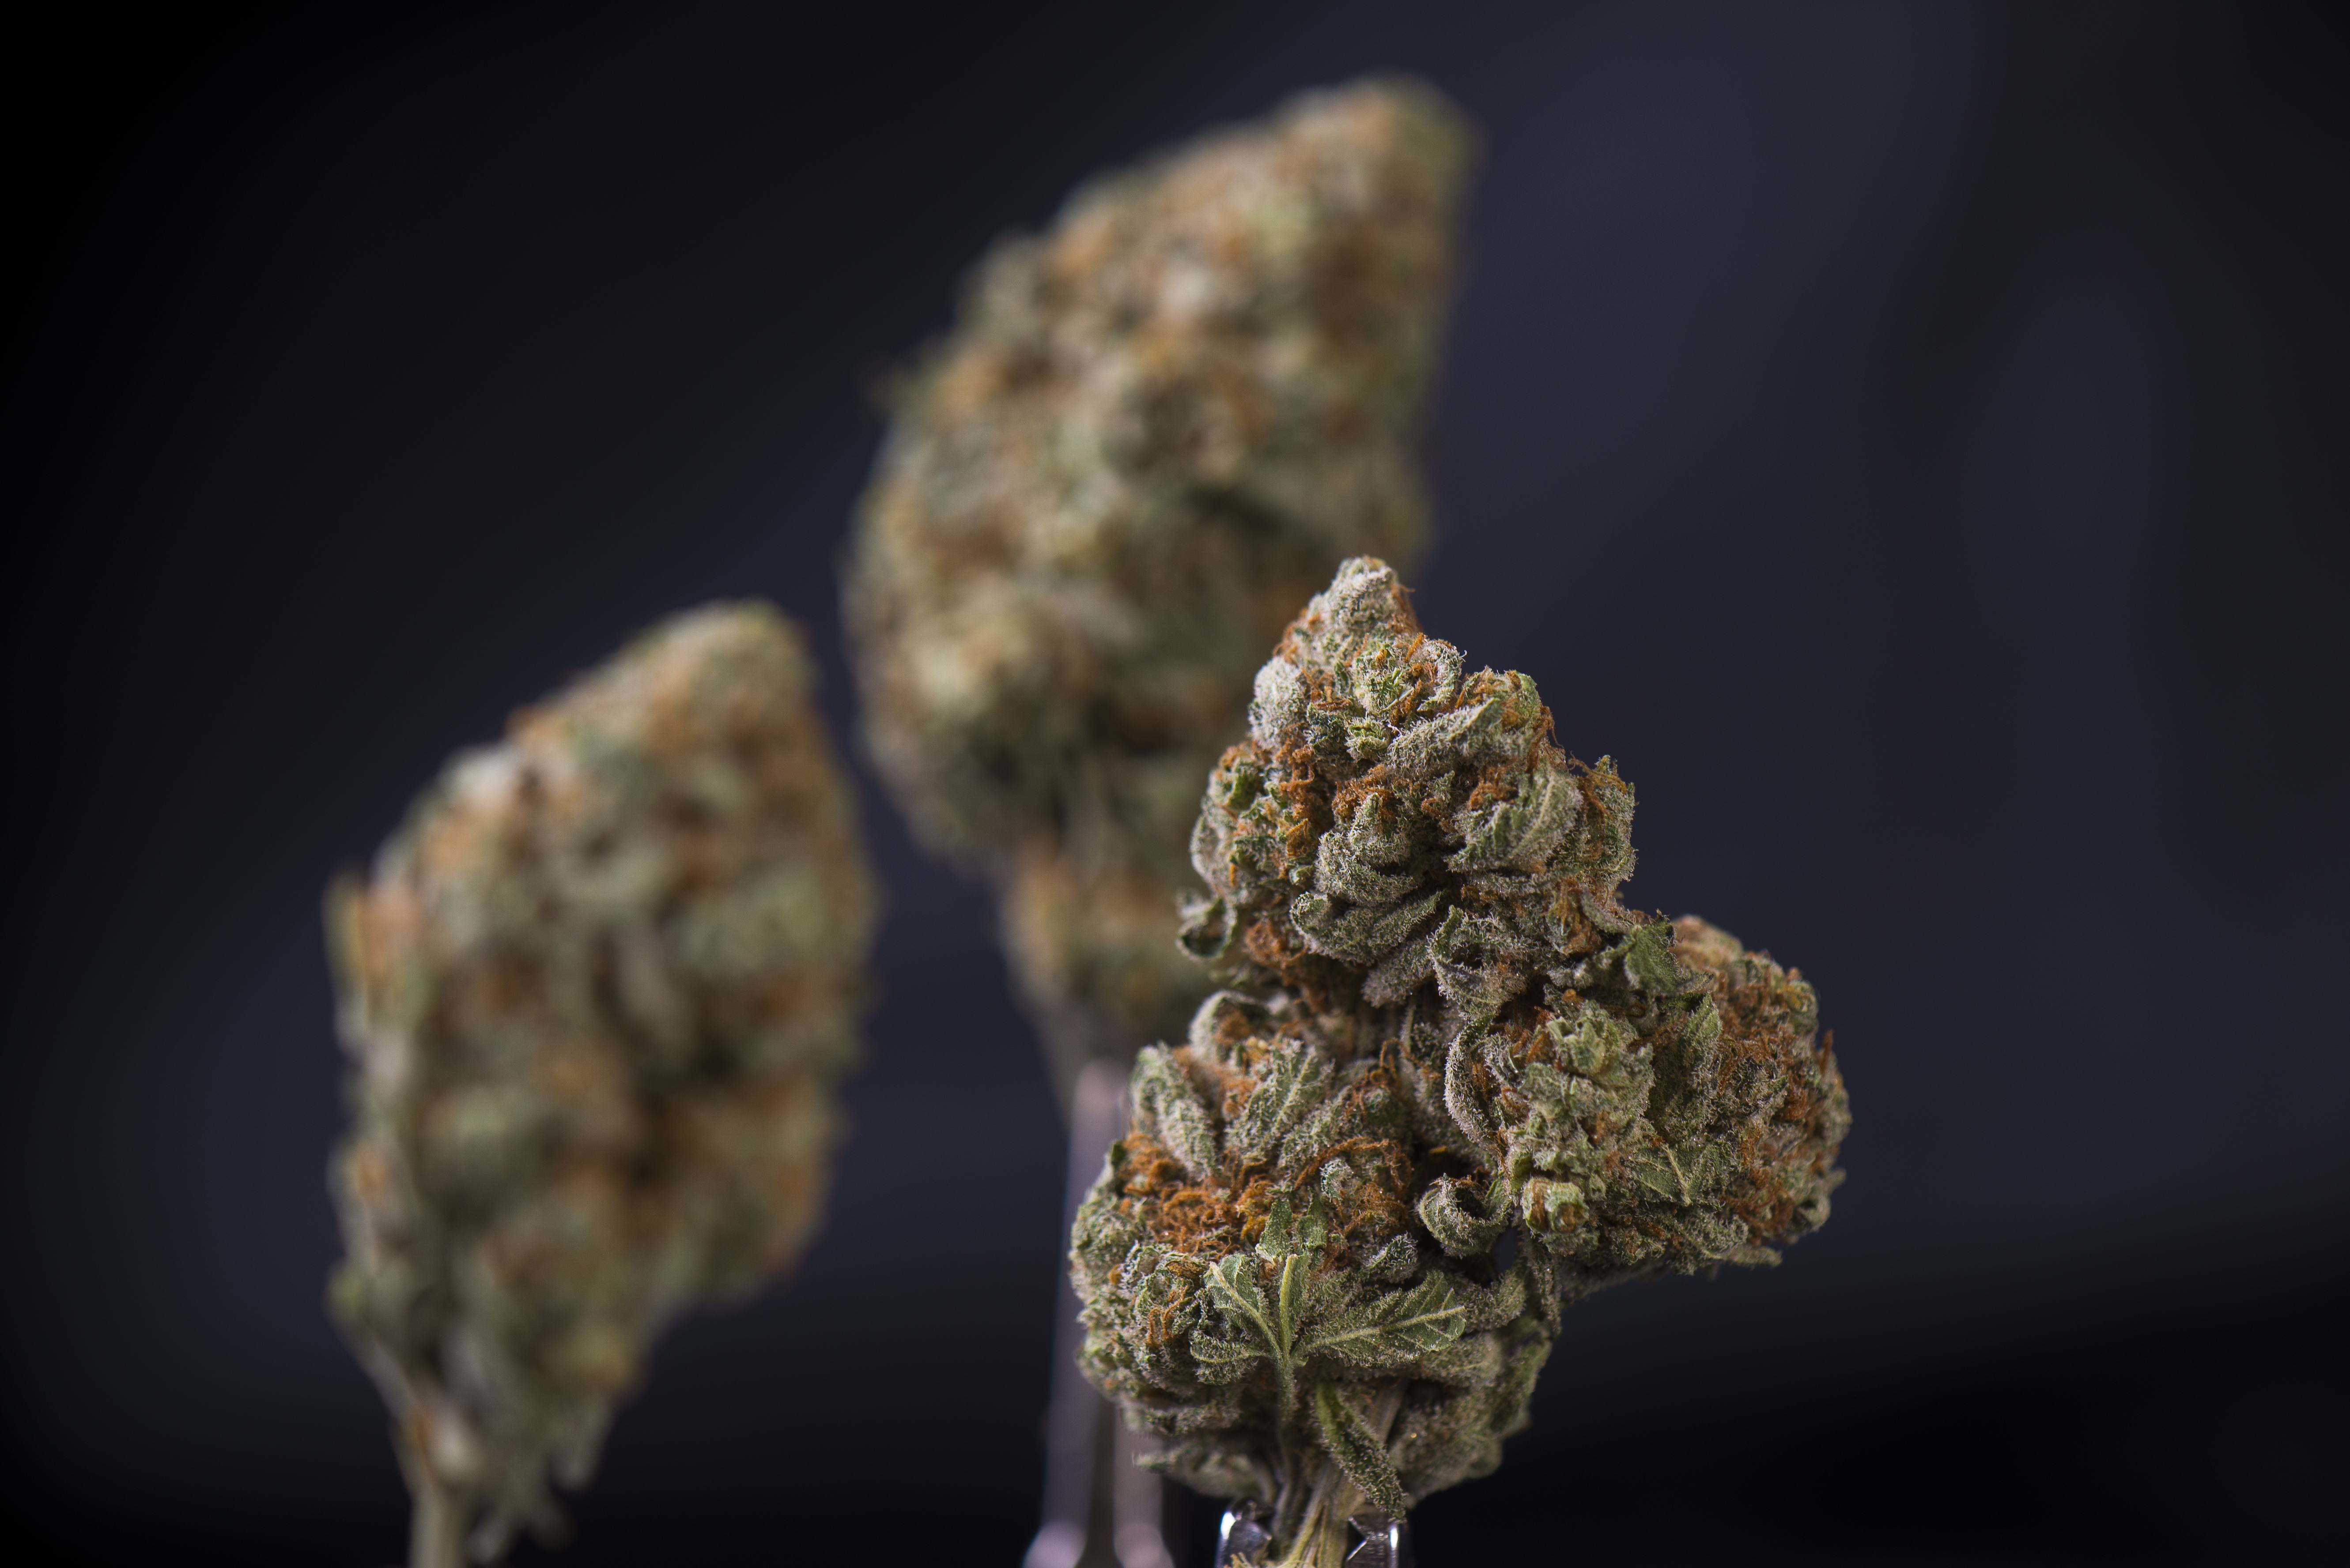 Marijuana buds are held by tweezers with one in focus bottom right and the other two other buds out of focus behind it on a dark background.